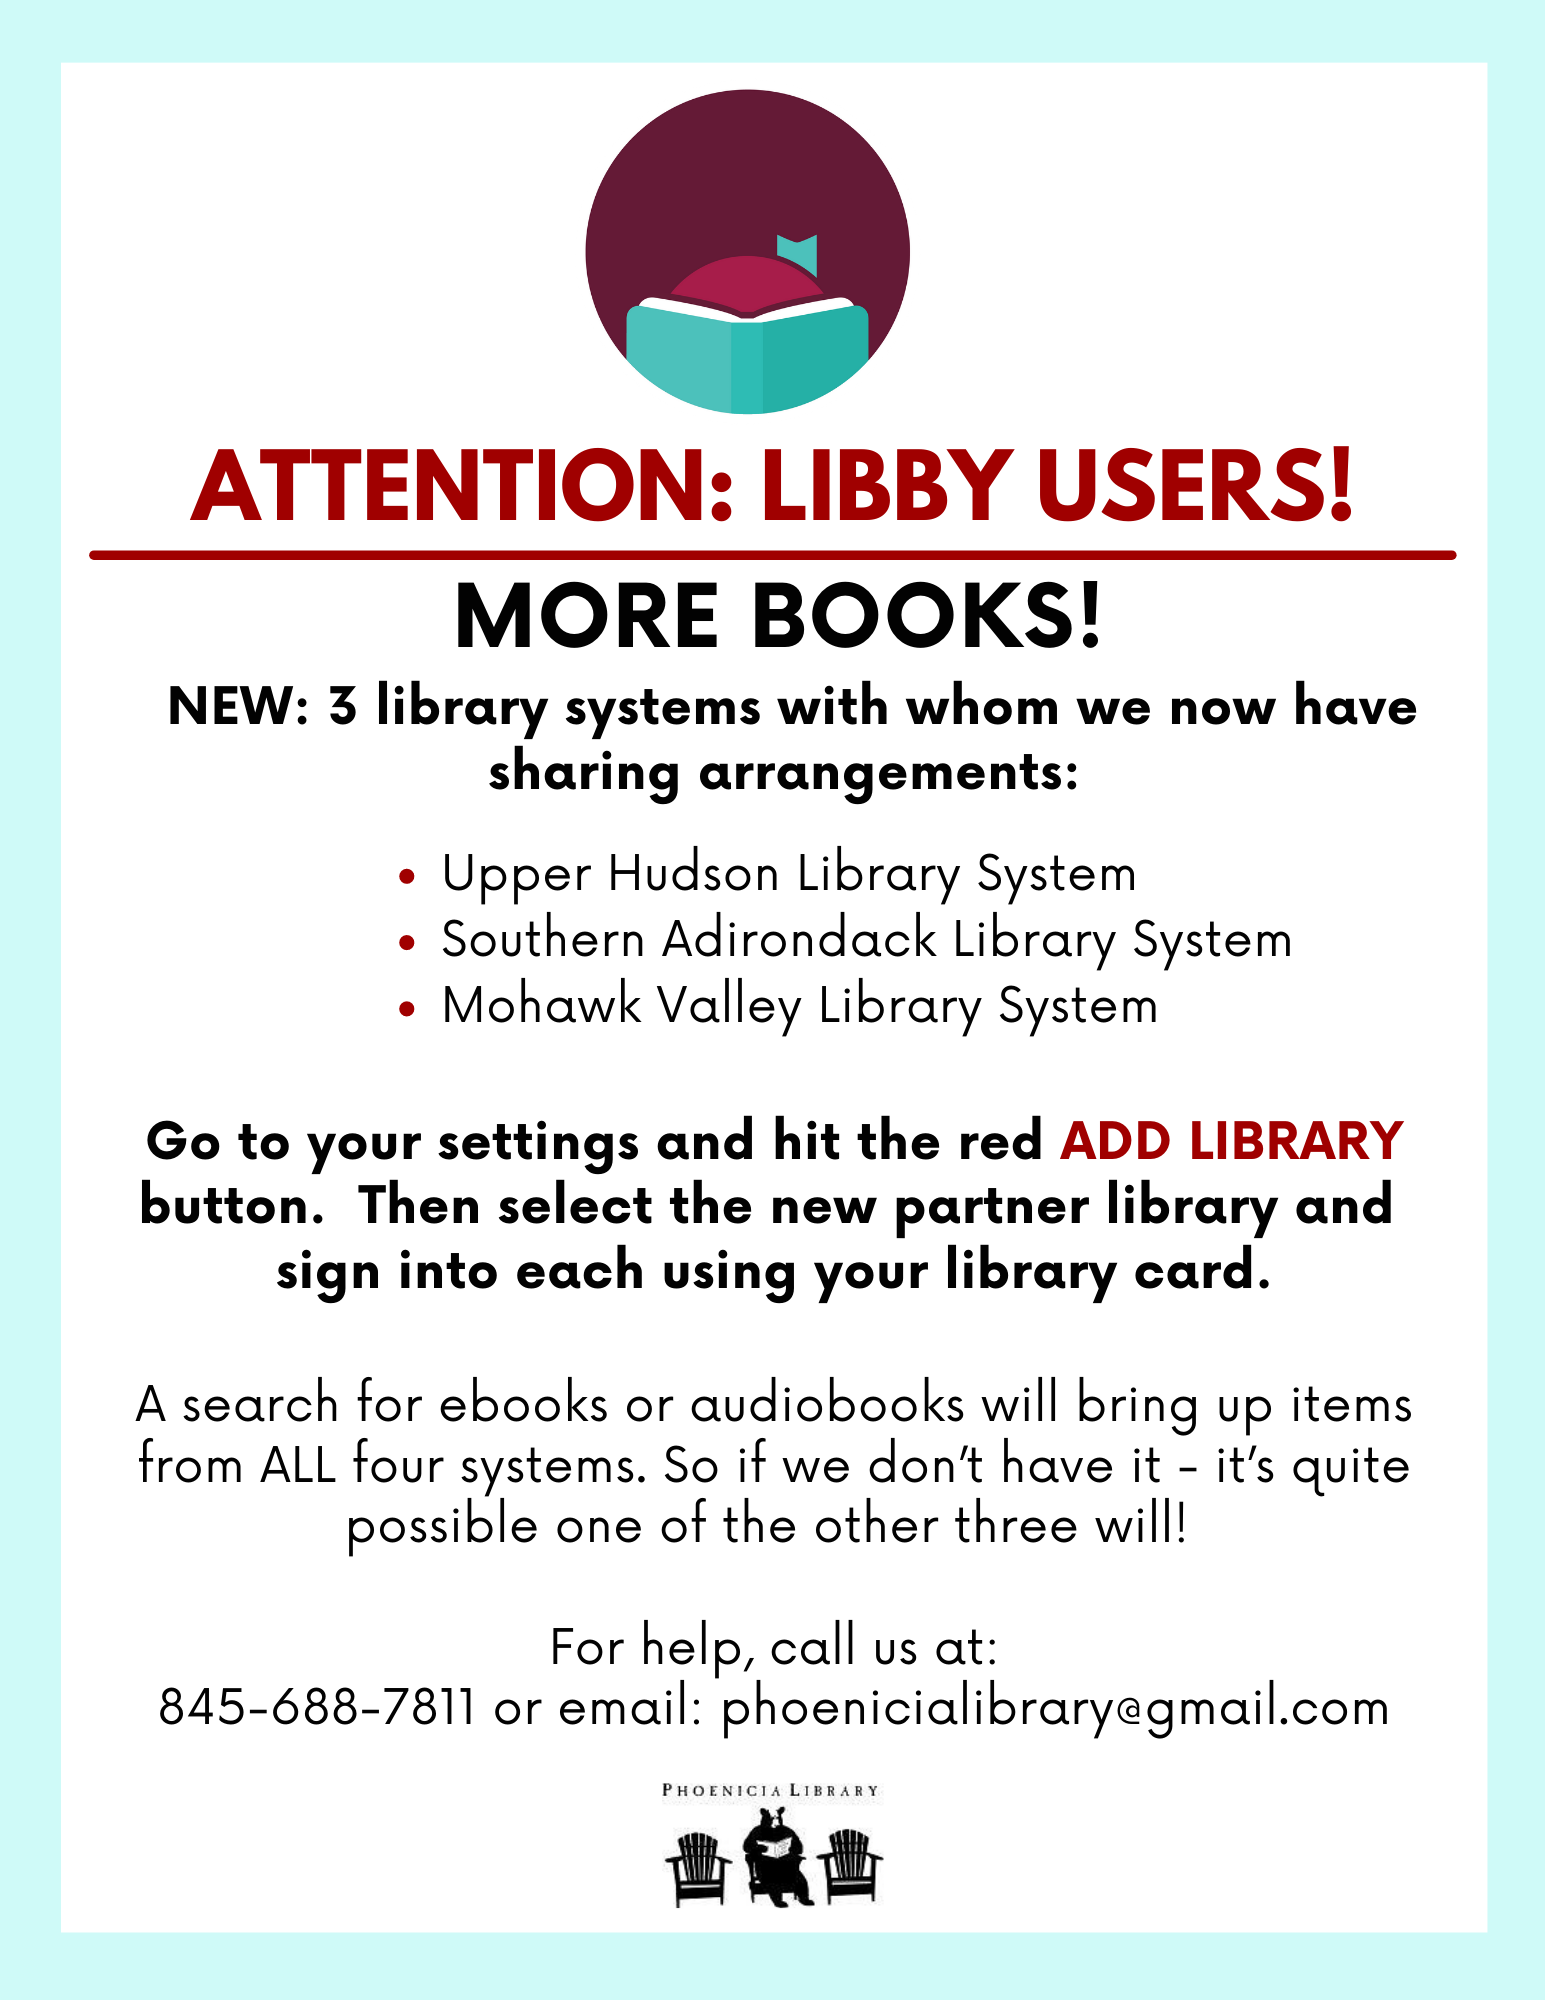 New: 3 library system with whom we now have sharing arrangements: Upper Hudson, Southern Adirondack and Mohawk Valley.